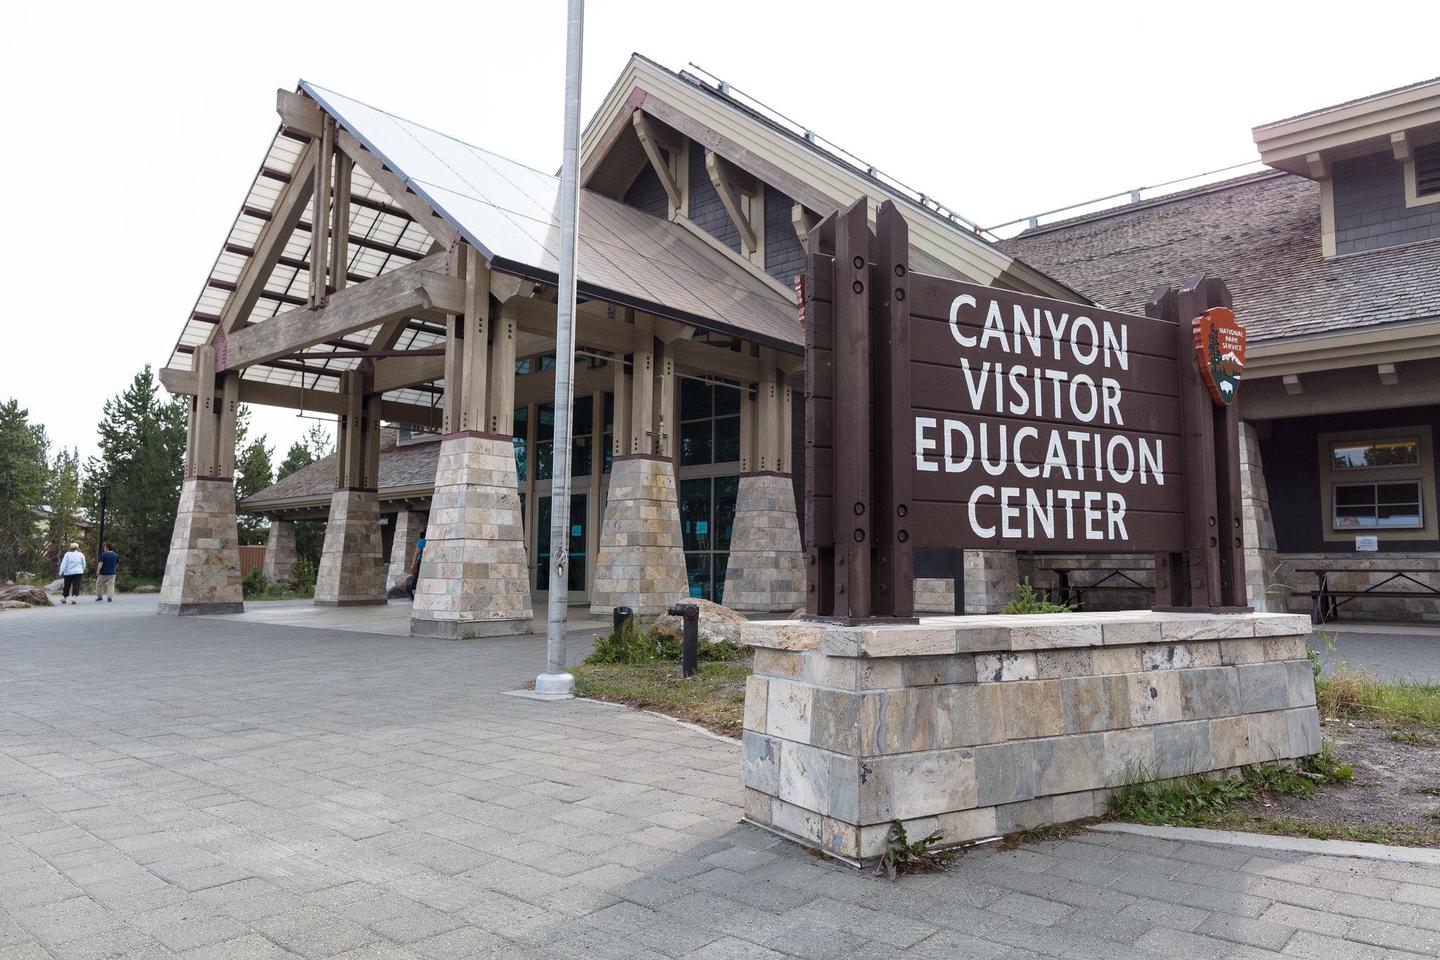 Canyon Visitor Education CenterVisit the Canyon Visitor Education Center to learn about geology of the Yellowstone volcano and get park orientation information.